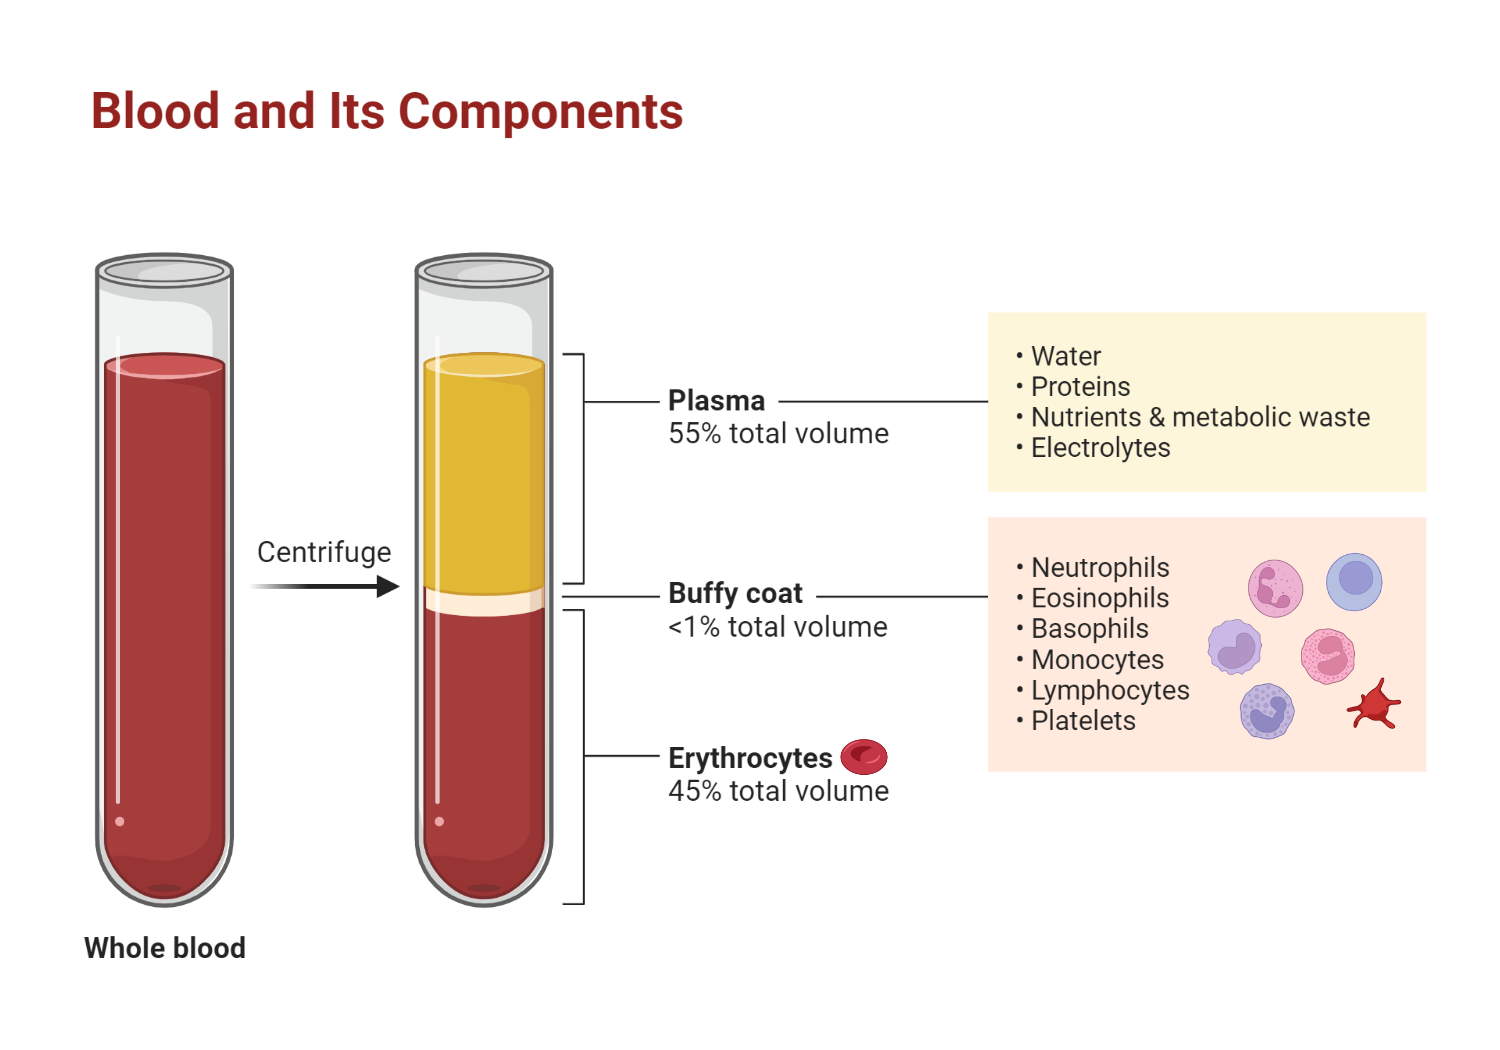 Components of blood